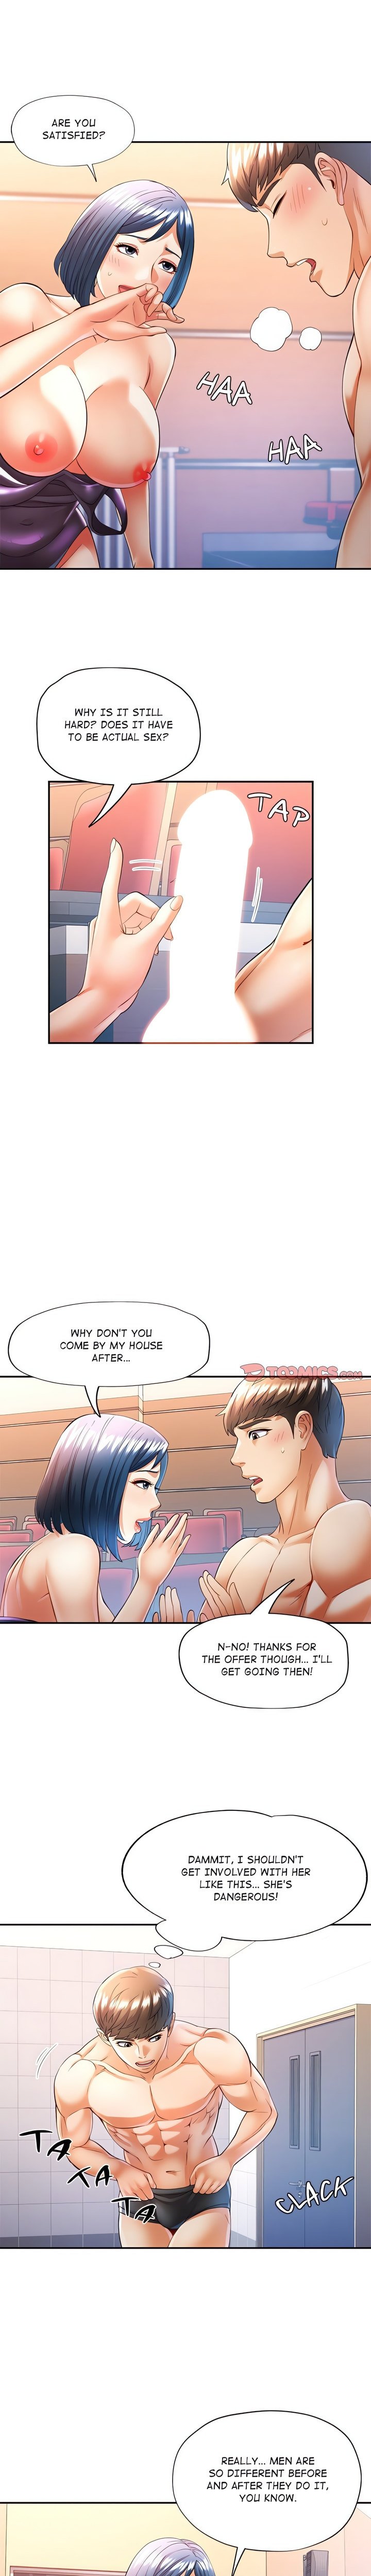 in-her-place-chap-24-14